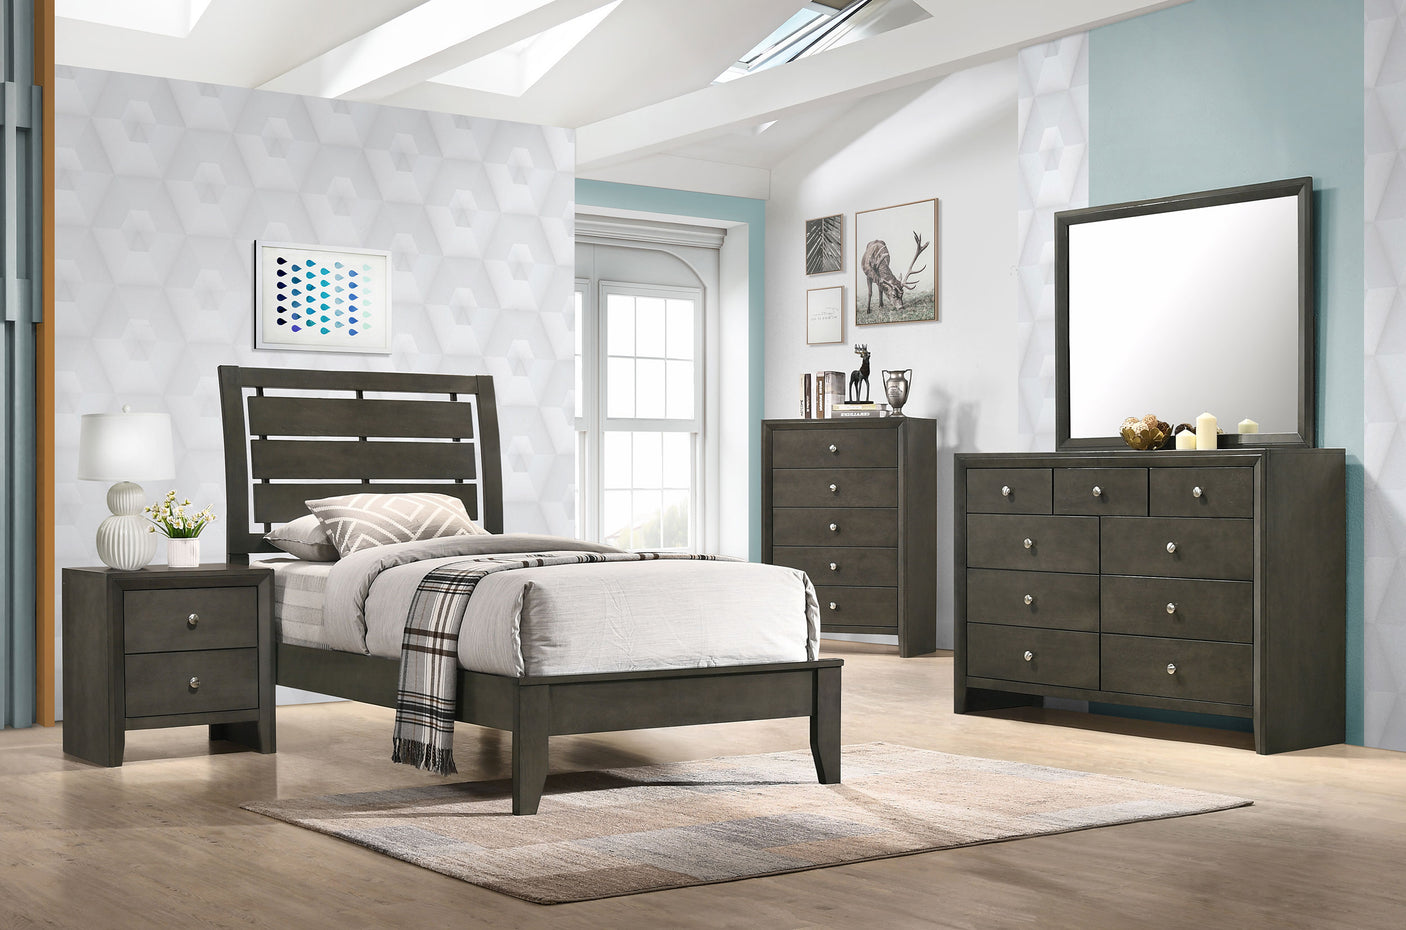 Twin Bed - Serenity Wood Twin Panel Bed Mod Grey